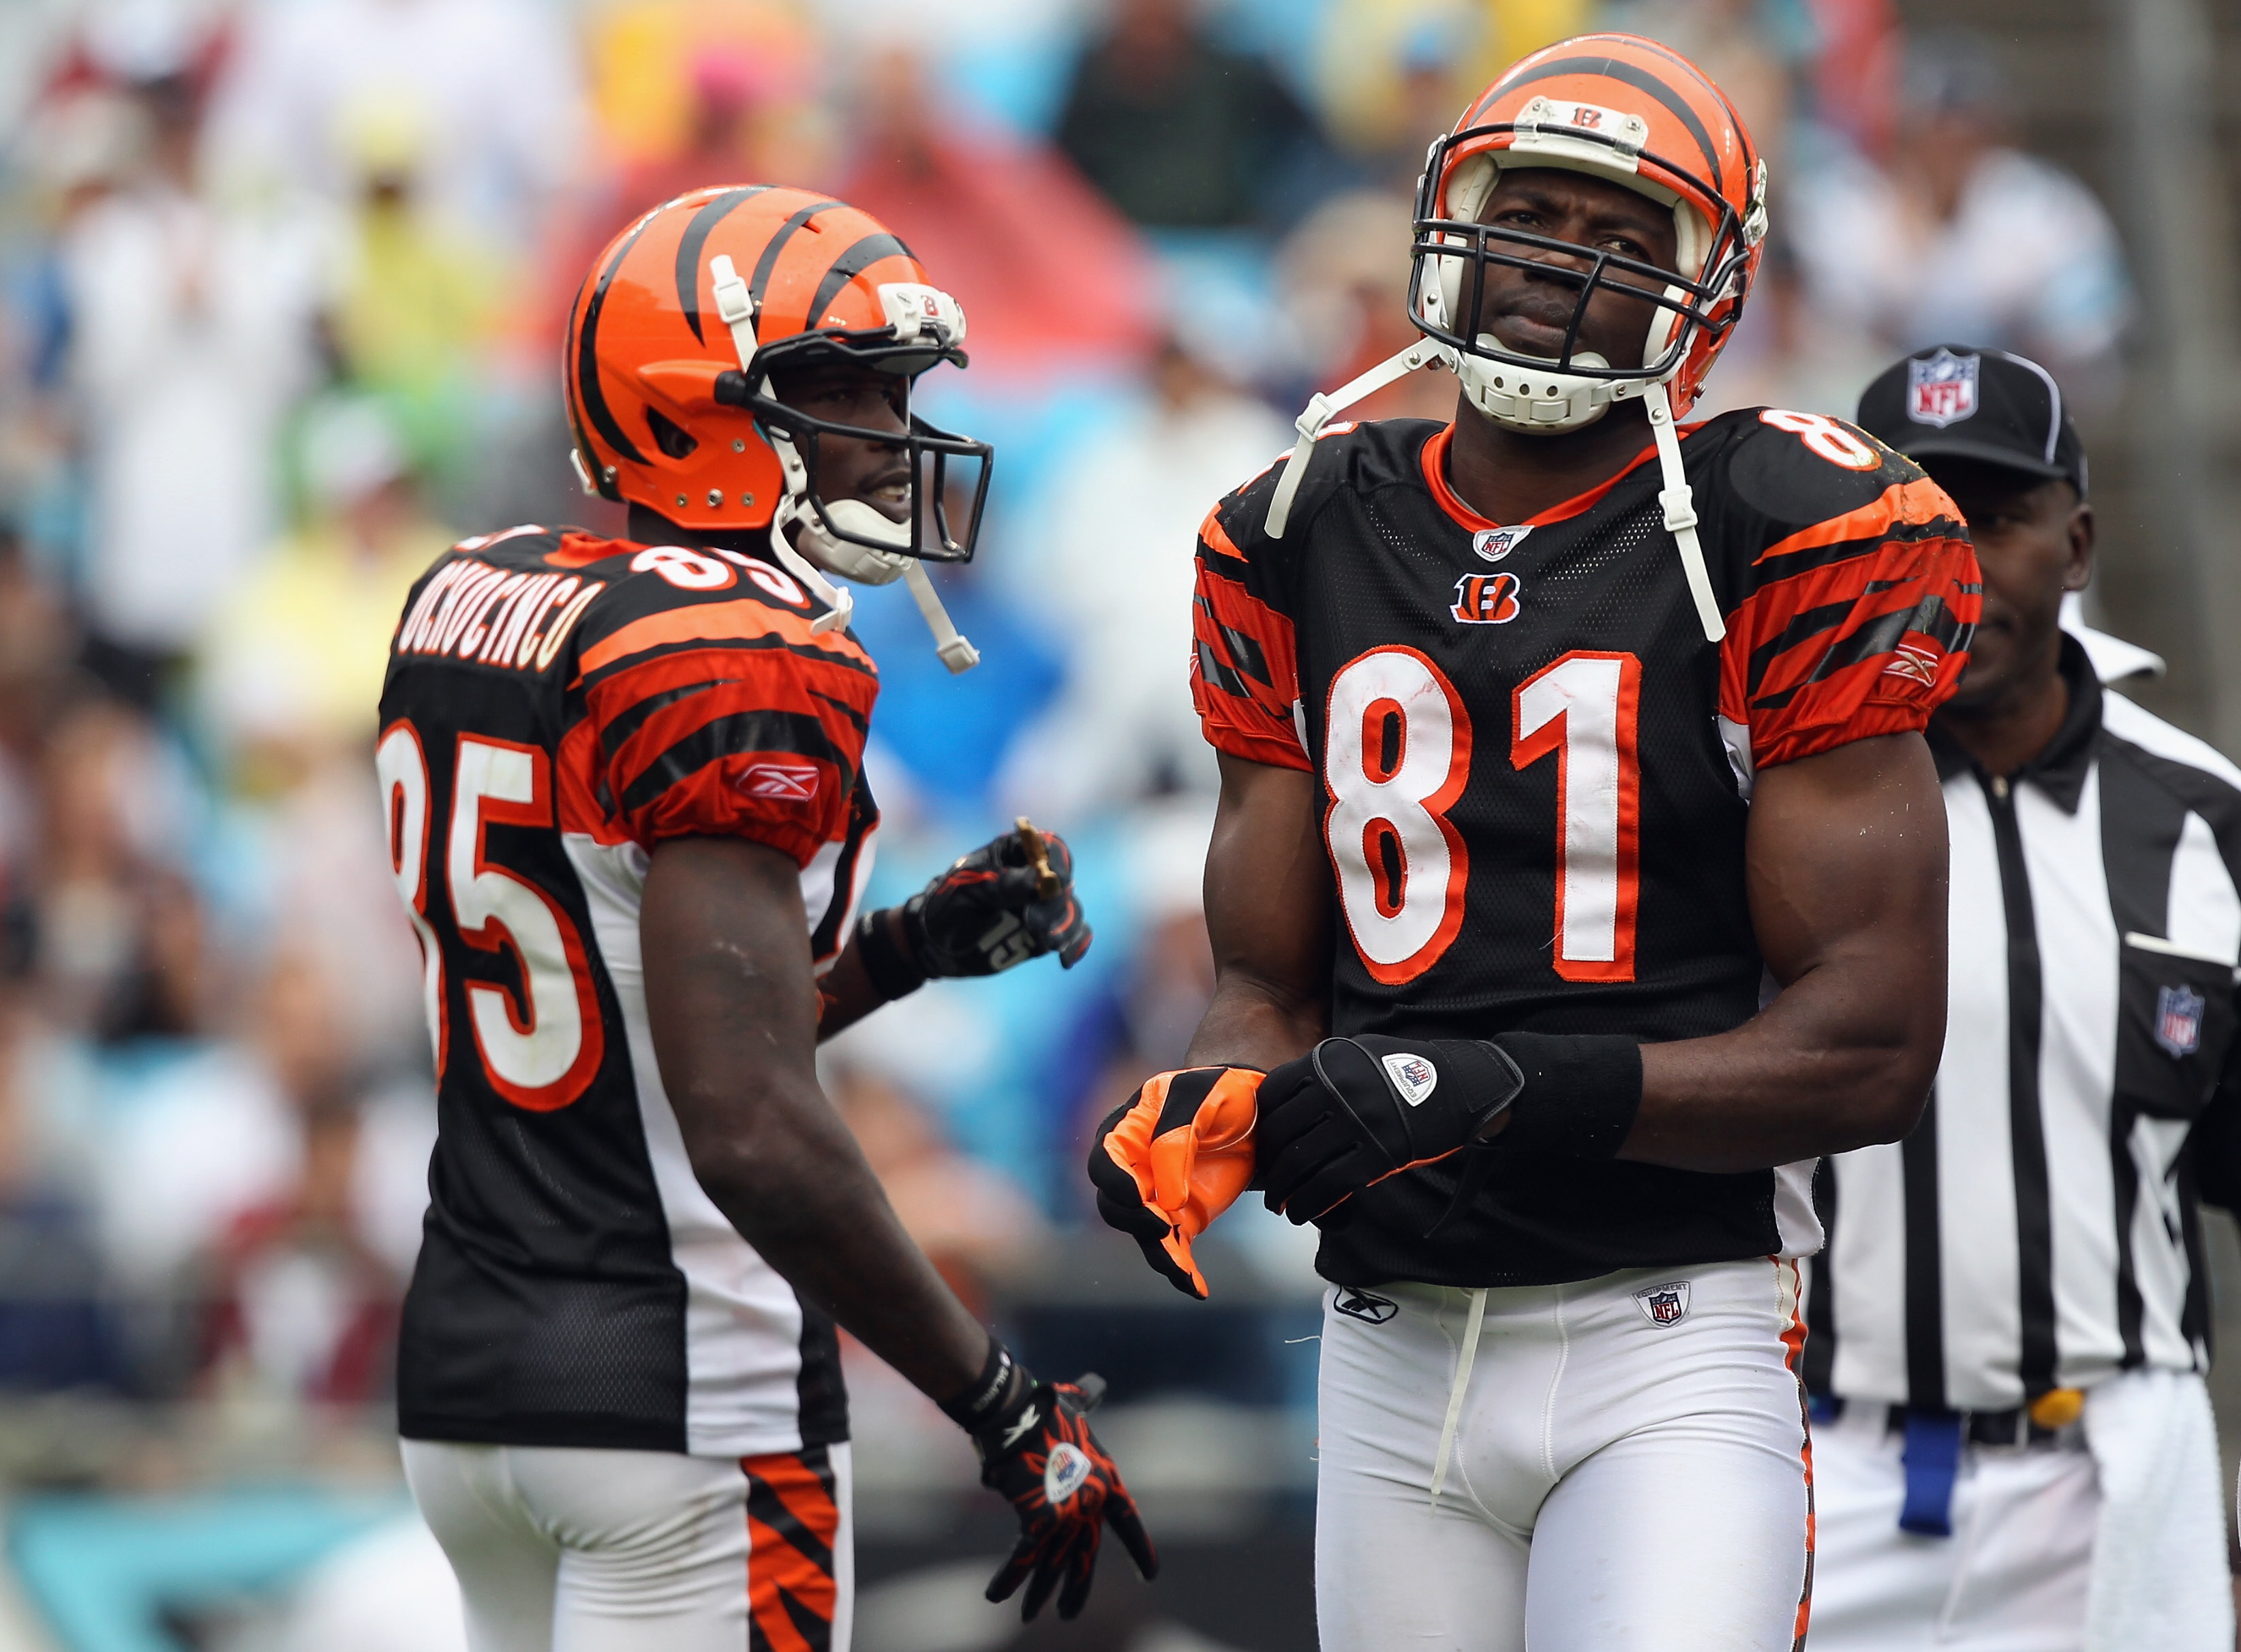 Chad Ochocinco : What Happened to Chad Ochocinco - NFL Comeback in 2018 ... - He played college football for santa monica college and oregon state university, and played 11 seasons in the national football league (nfl).